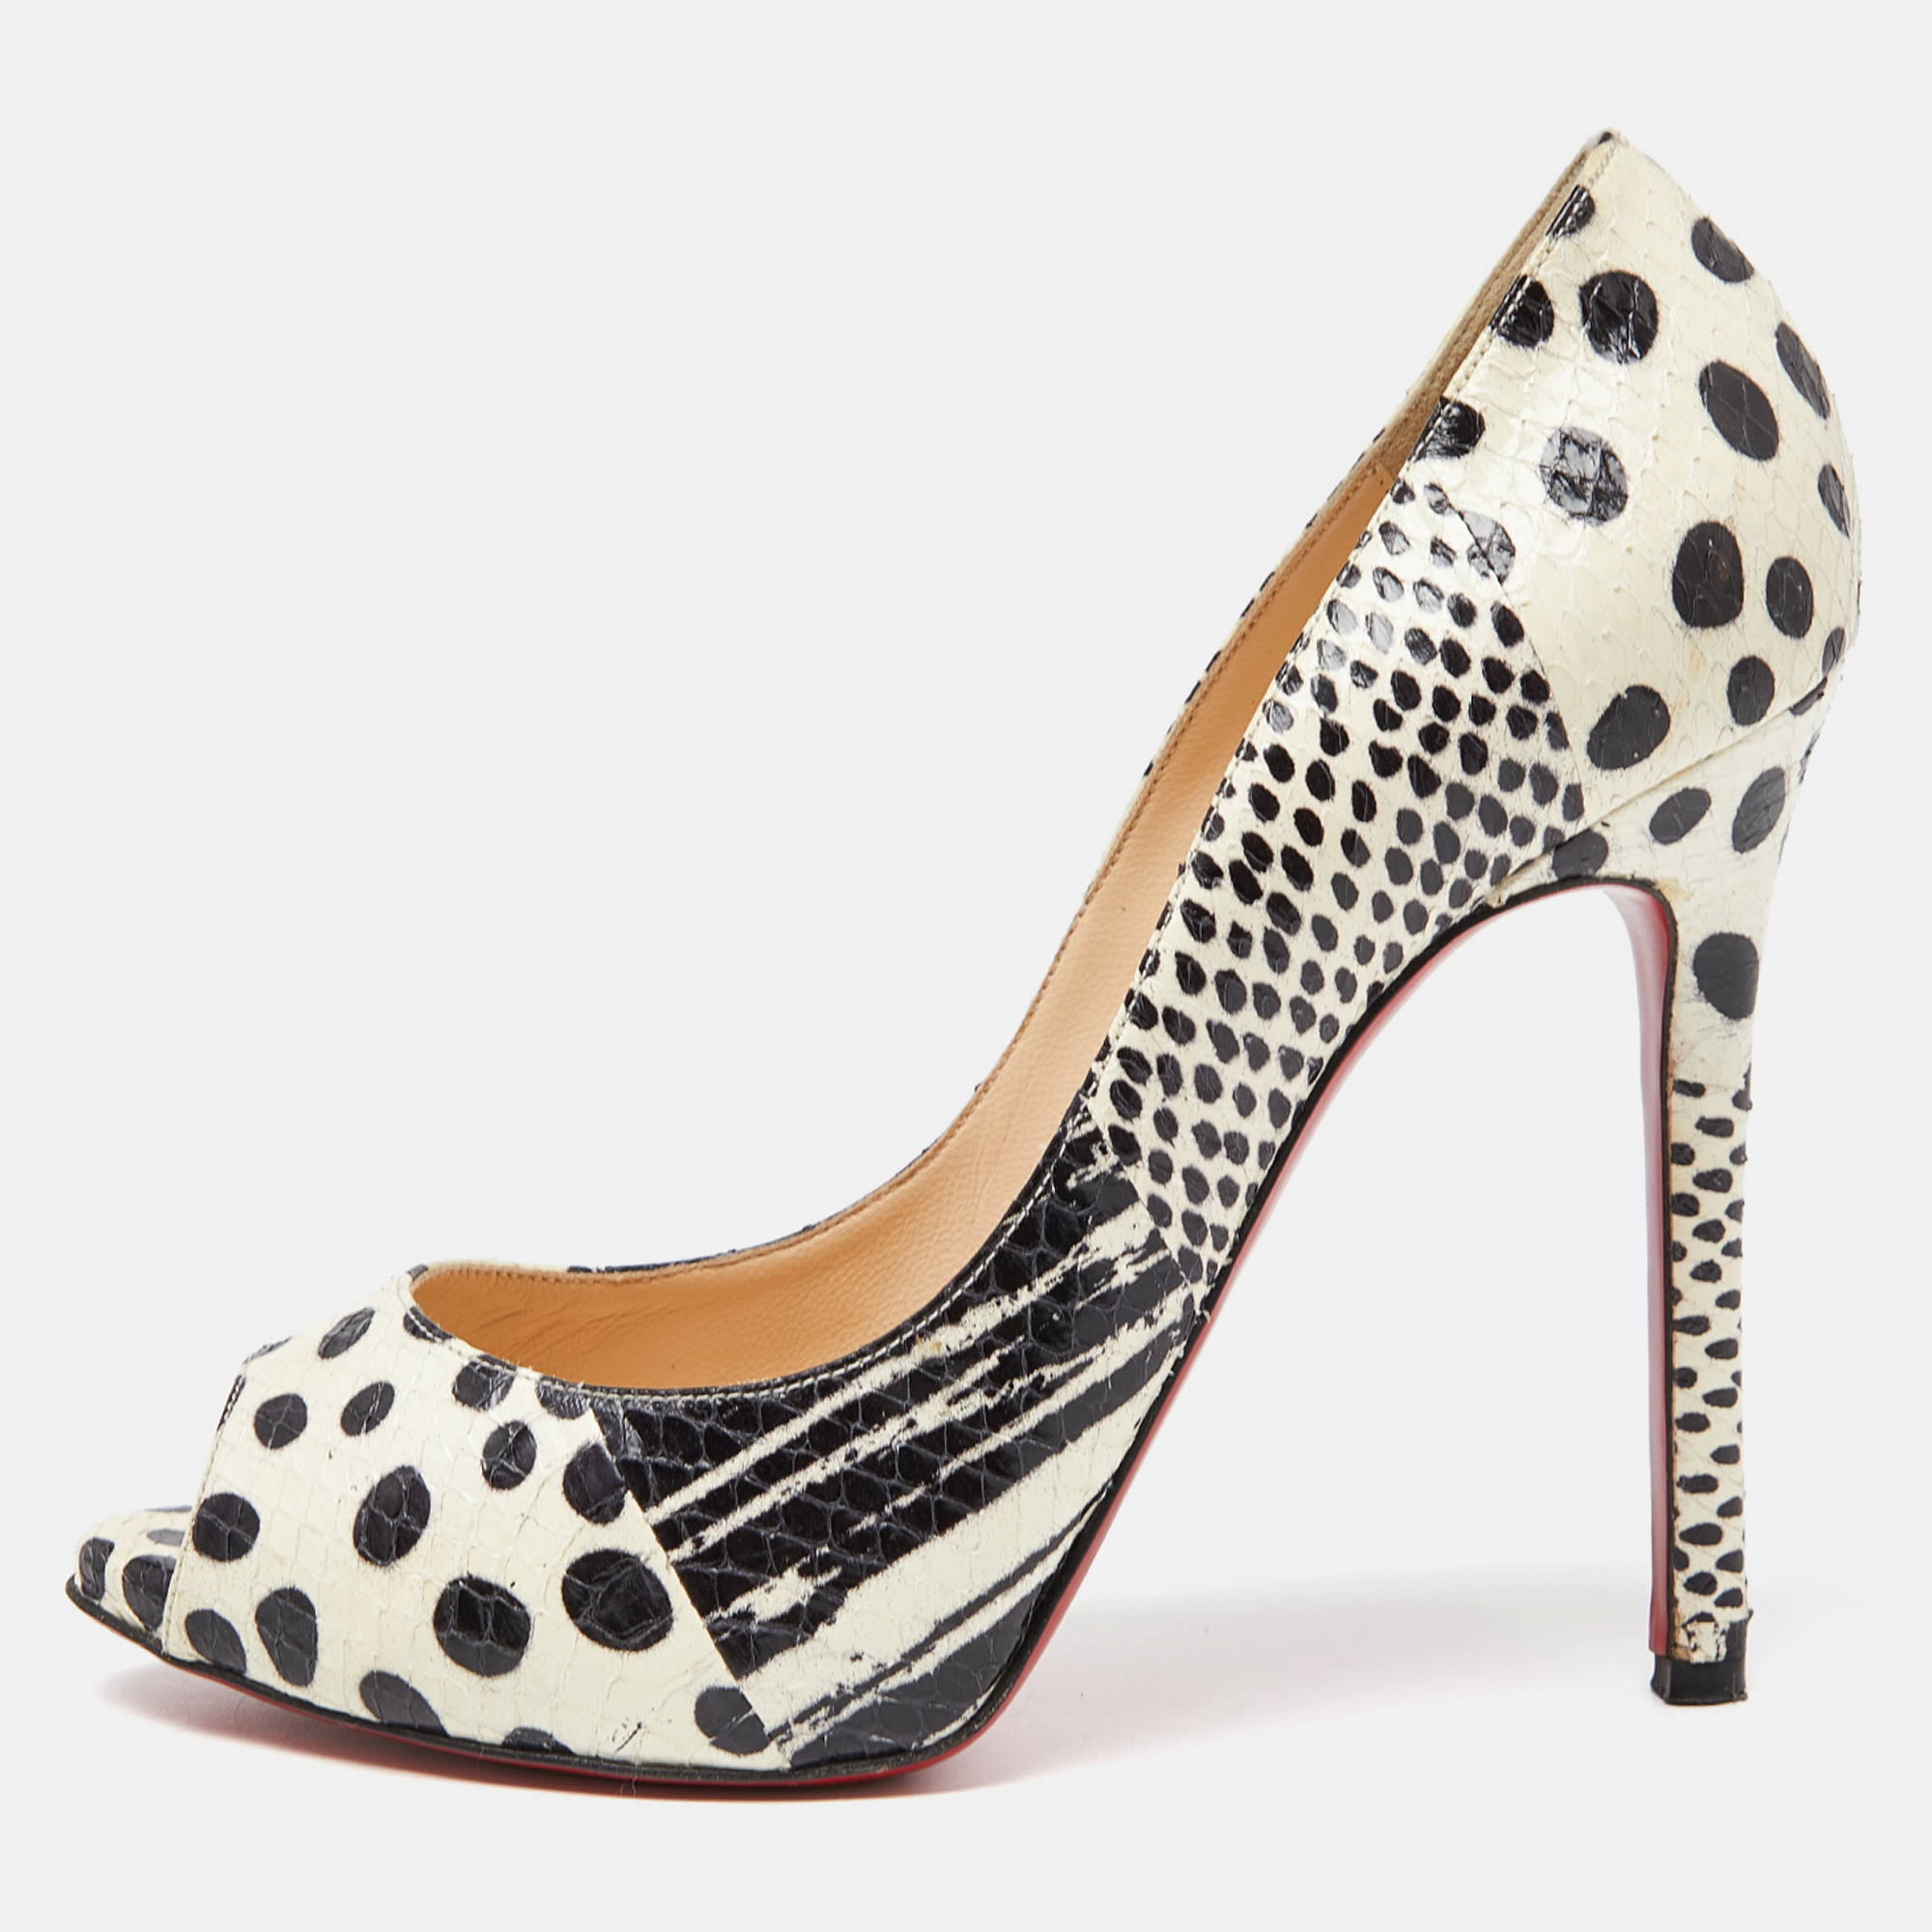 Pre-owned Christian Louboutin Black/white Watersnake Printed Flo Pumps Size 37.5